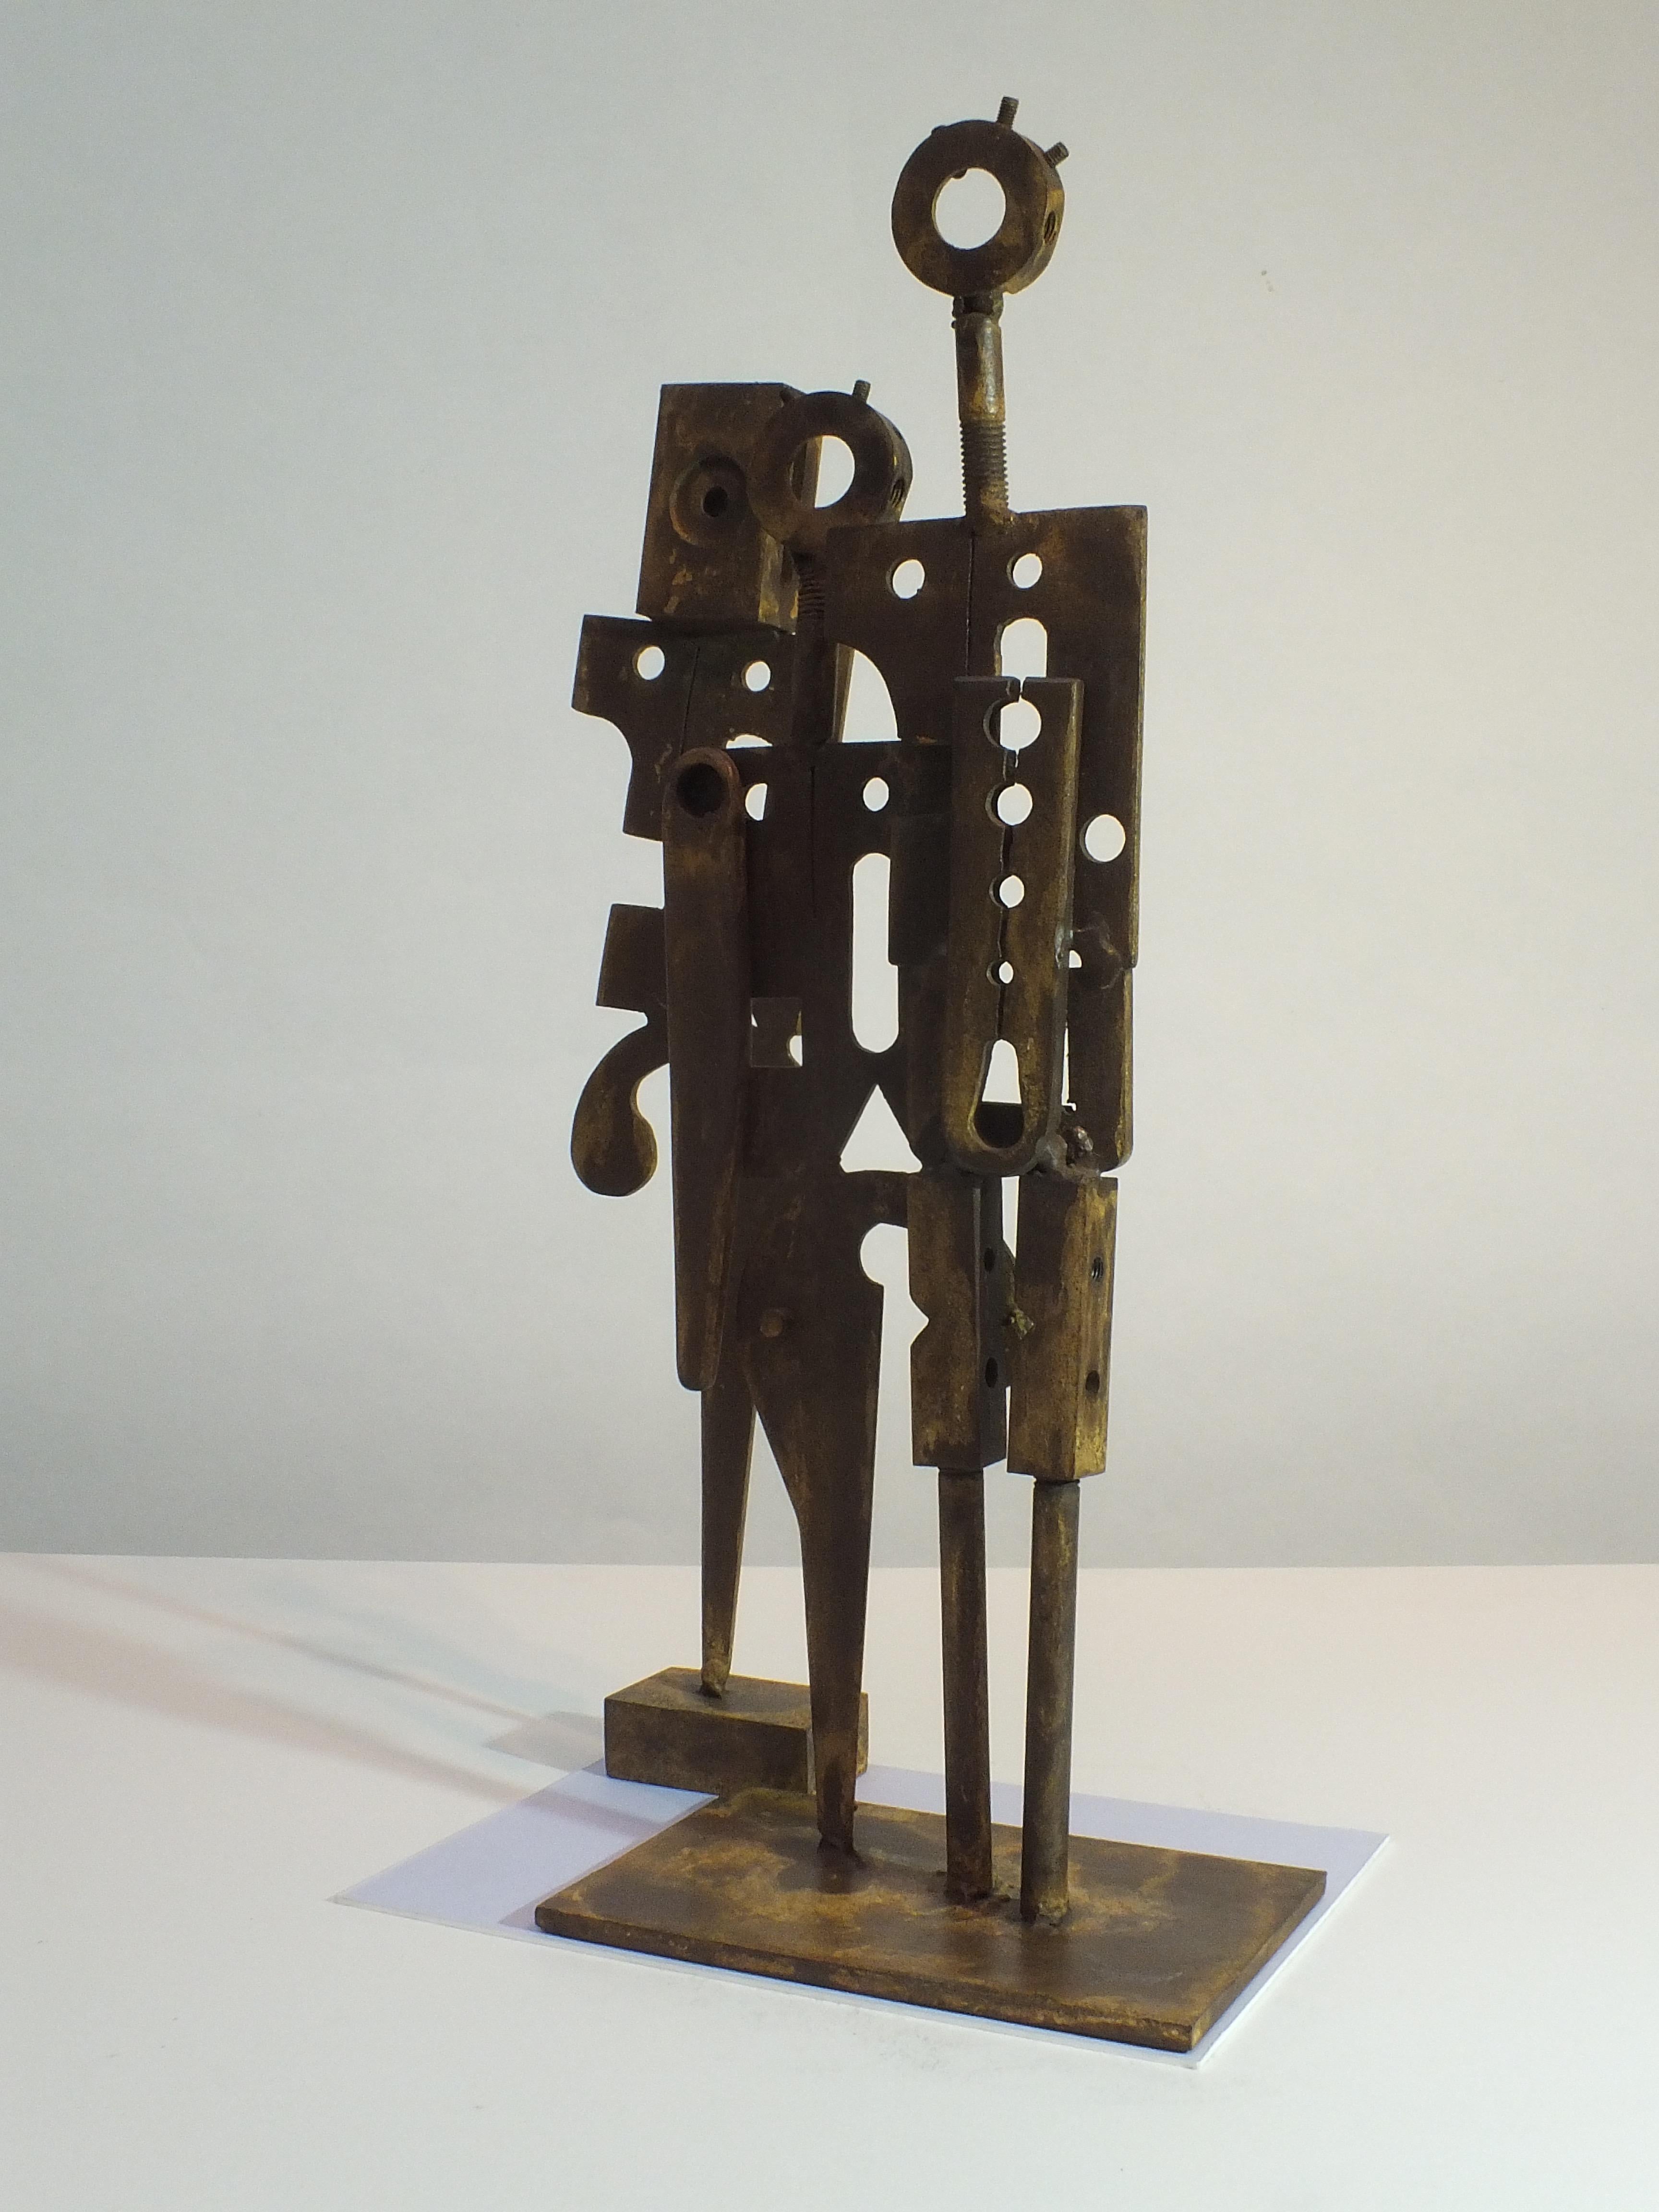 This 2 piece solid steel sculpture is a far more industrial, angular work from Rawlins. Perhaps looking at how people have evolved from earlier more simple eras into today's era of the machine and our reliance on them. However, the piece is not a